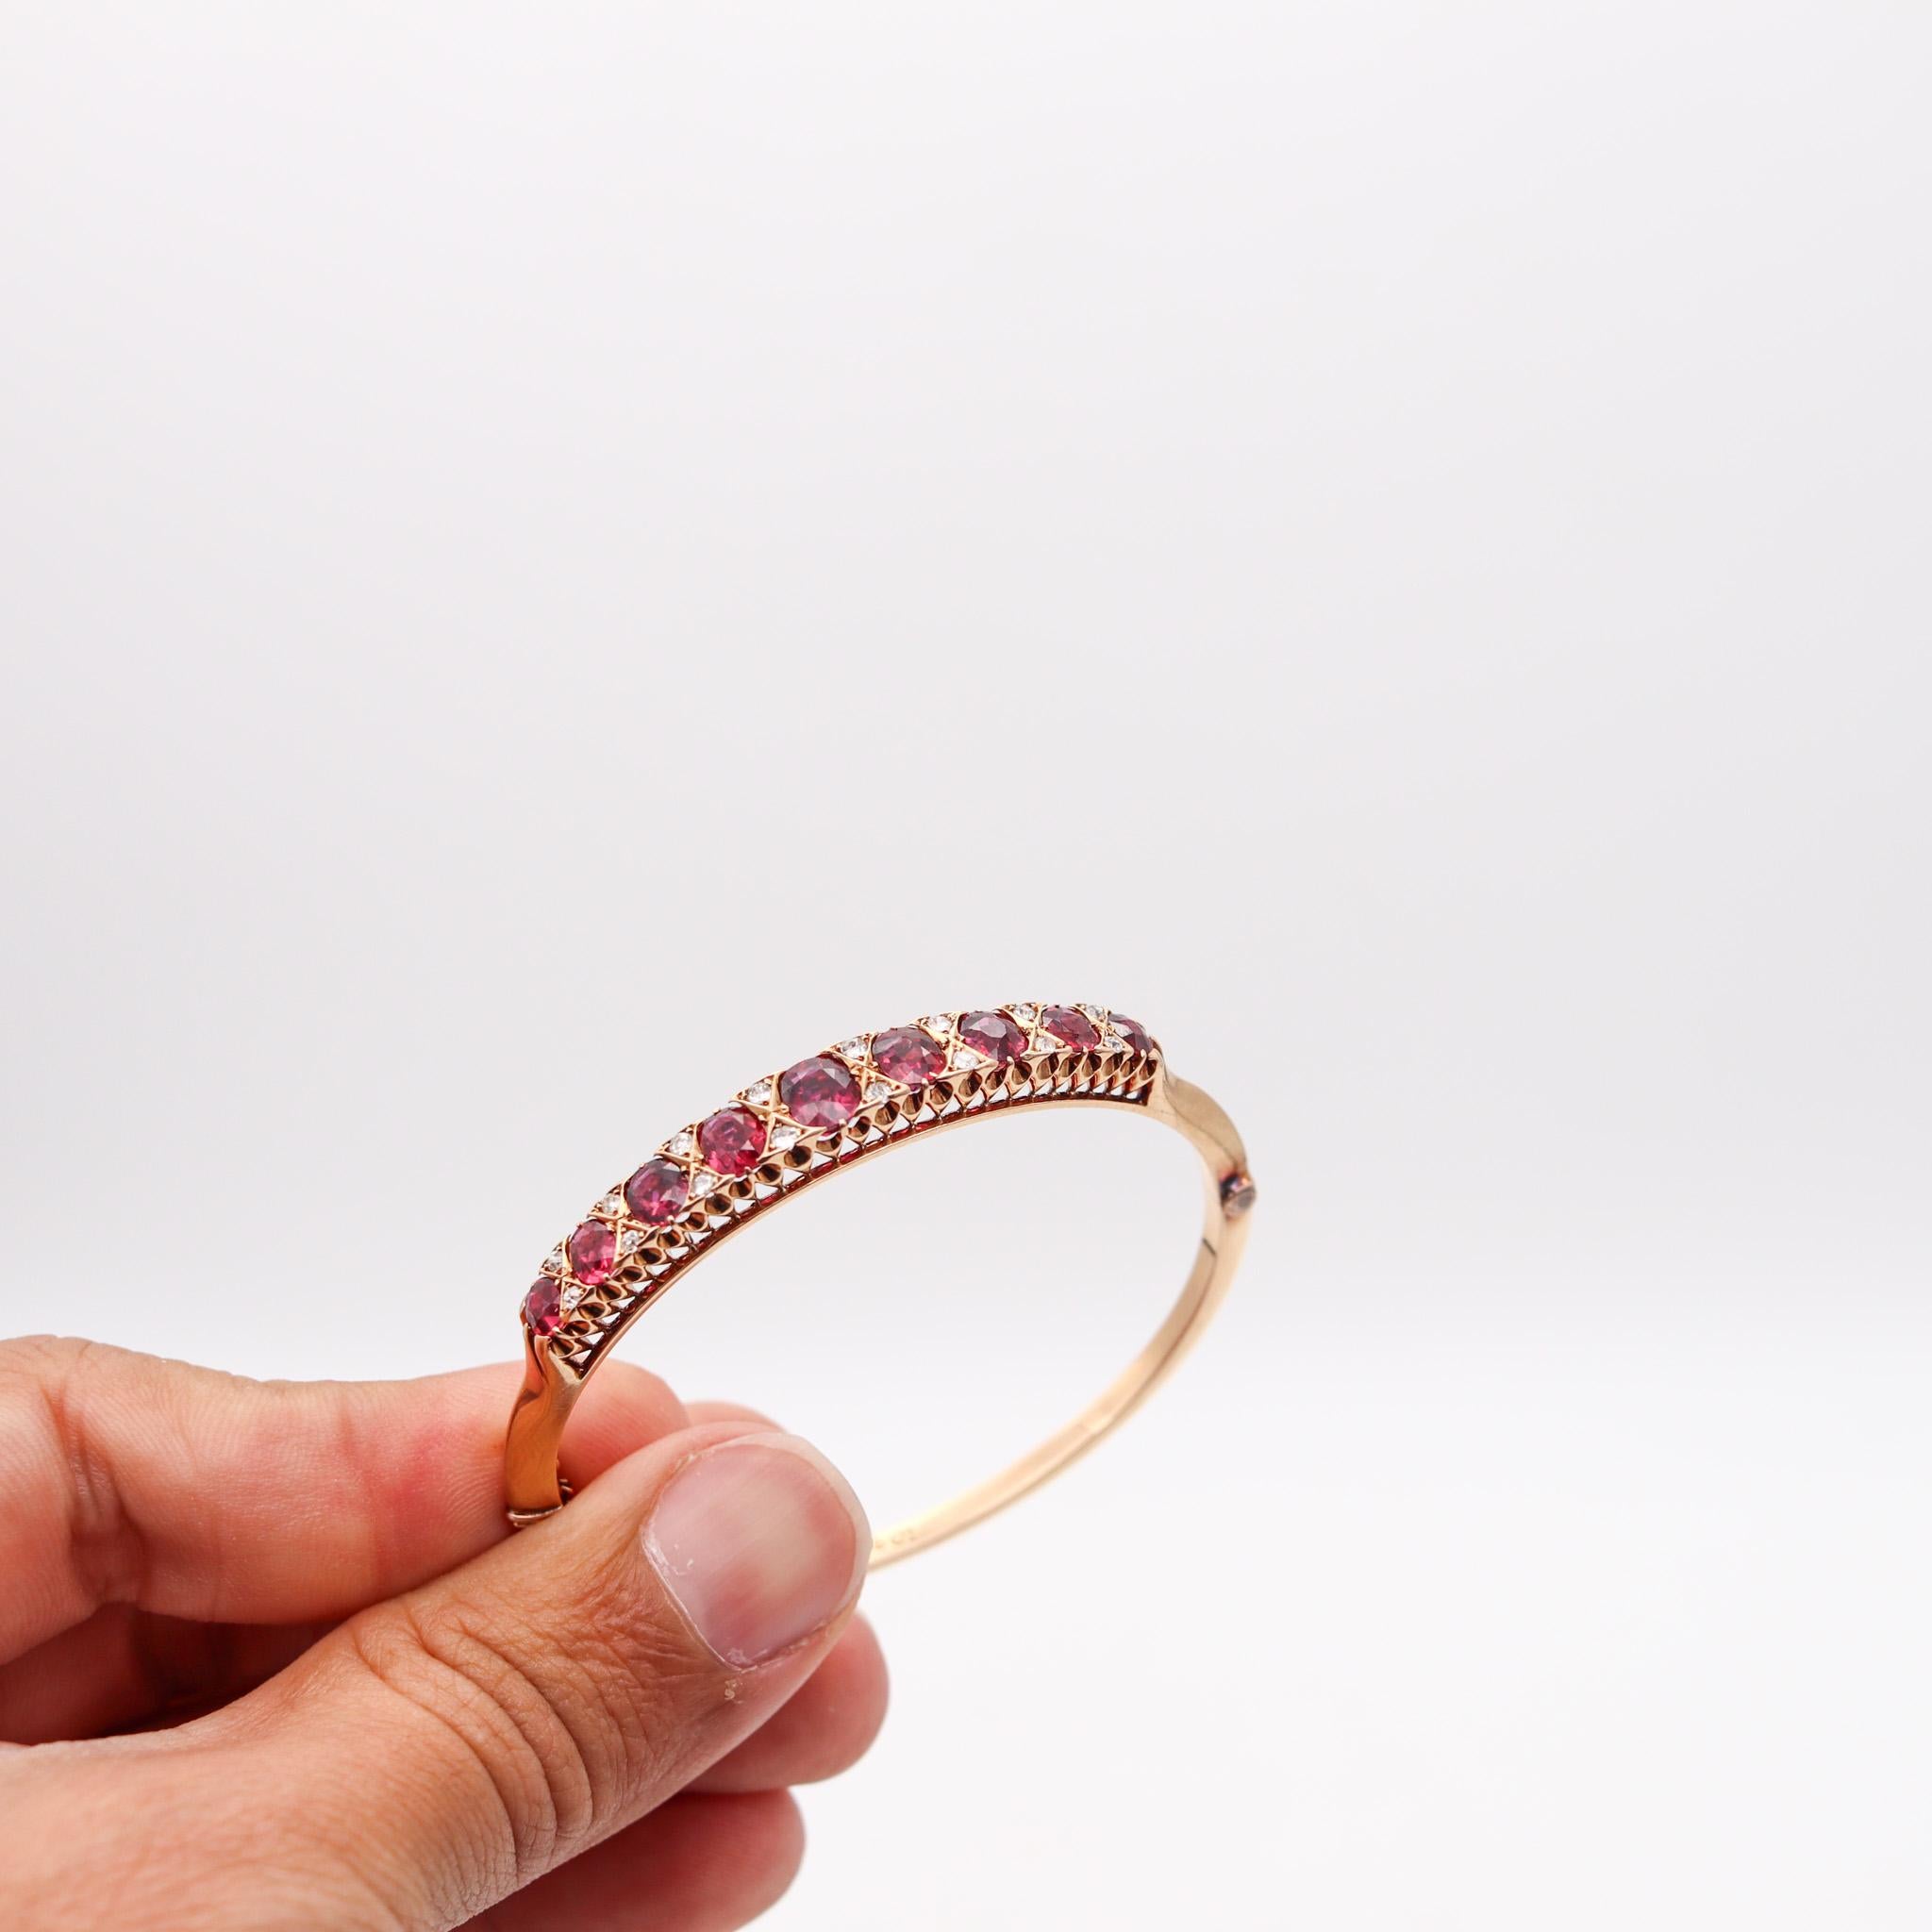 Victorian 1880 Bangle Bracelet In 15kt Gold With 14.35 Ctw Rubies And Diamonds 3